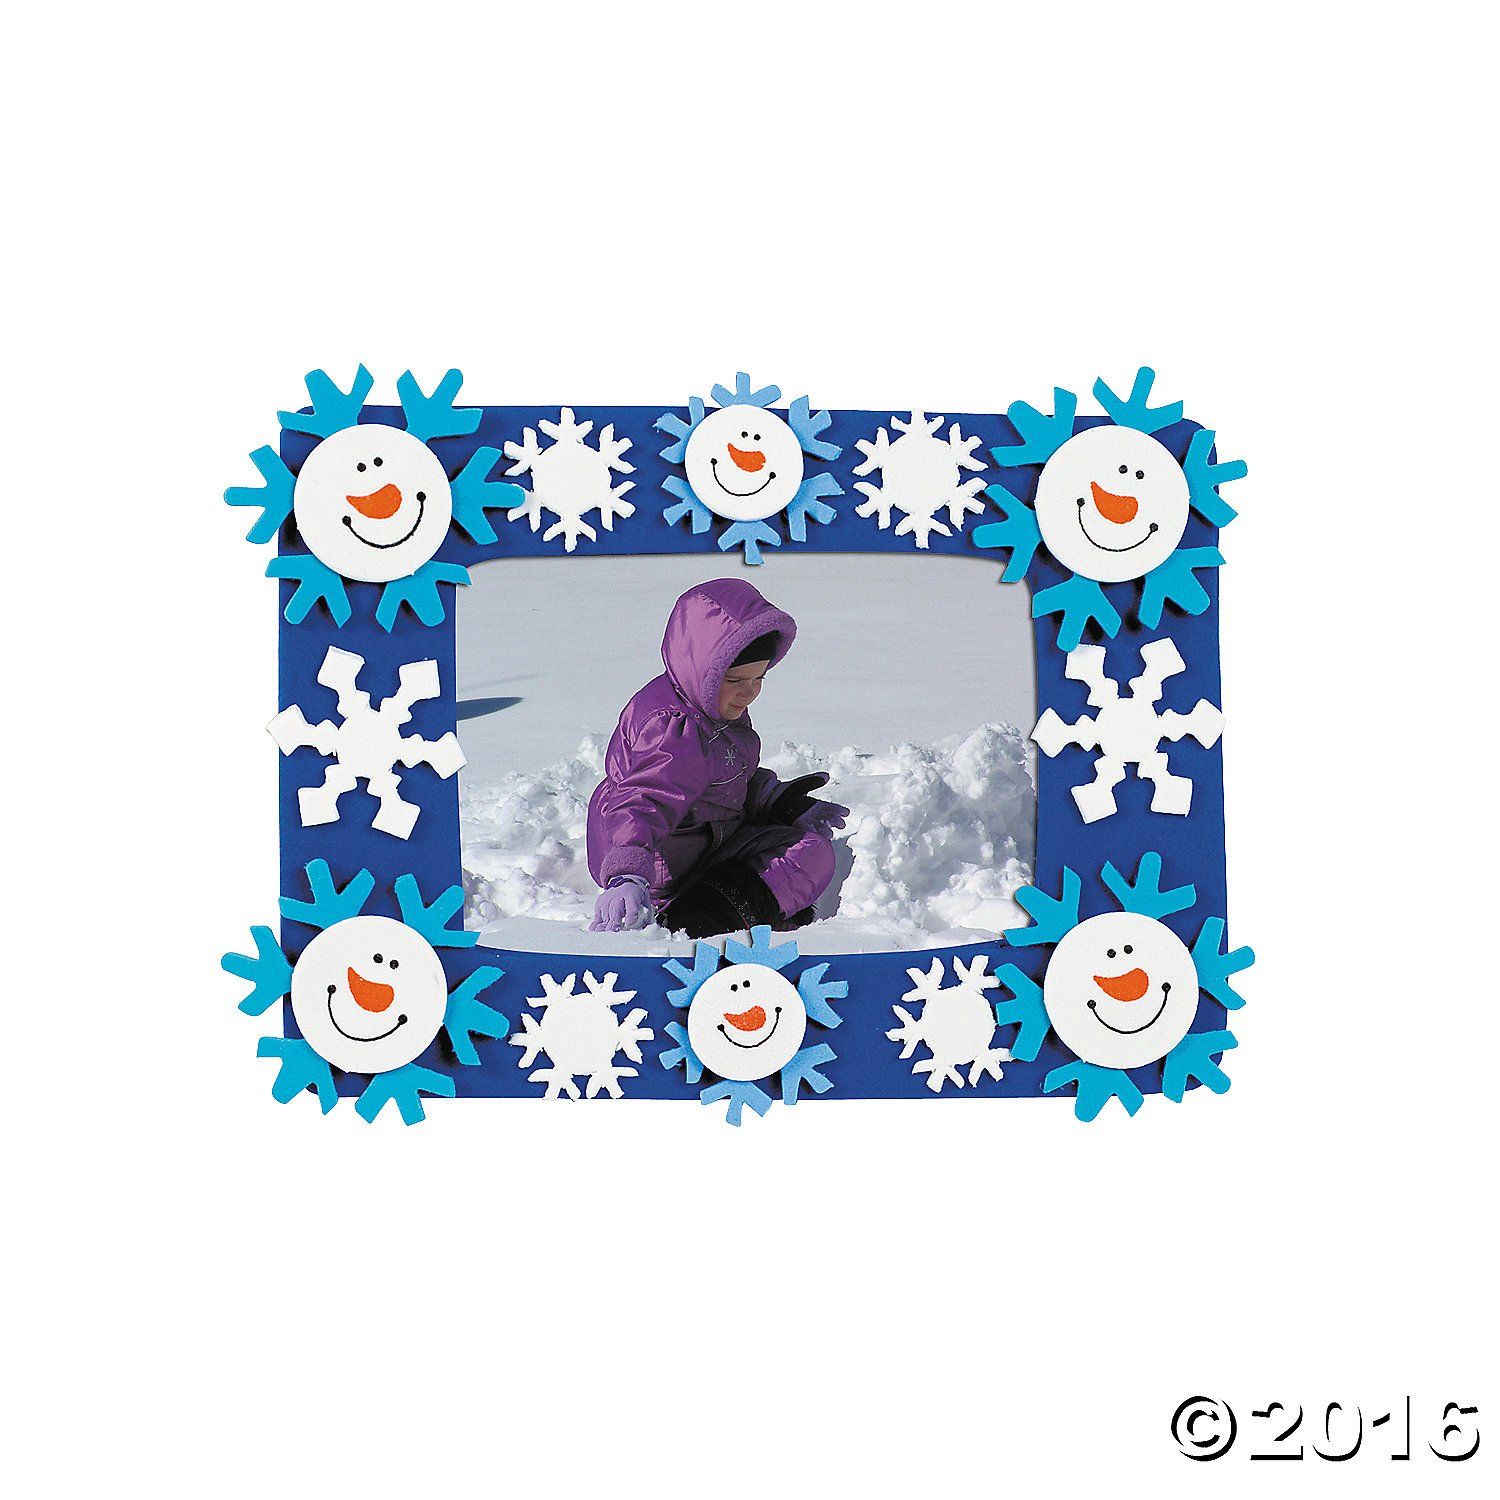 A picture of a child in purple winter coat framed by snowman head and blue and white snowflake